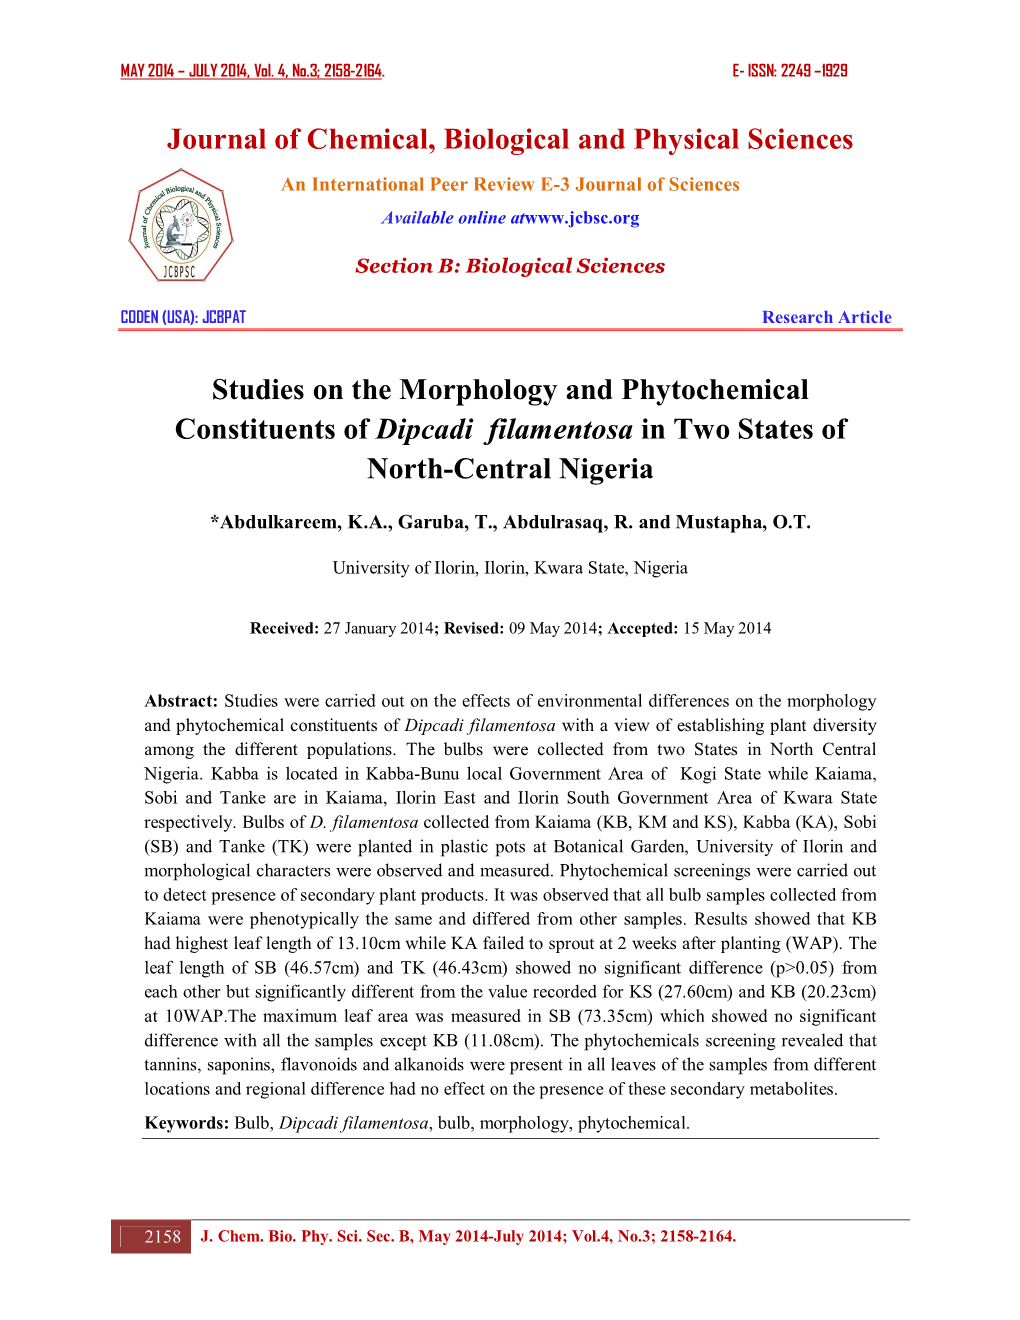 Studies on the Morphology and Phytochemical Constituents of Dipcadi Filamentosa in Two States of North-Central Nigeria